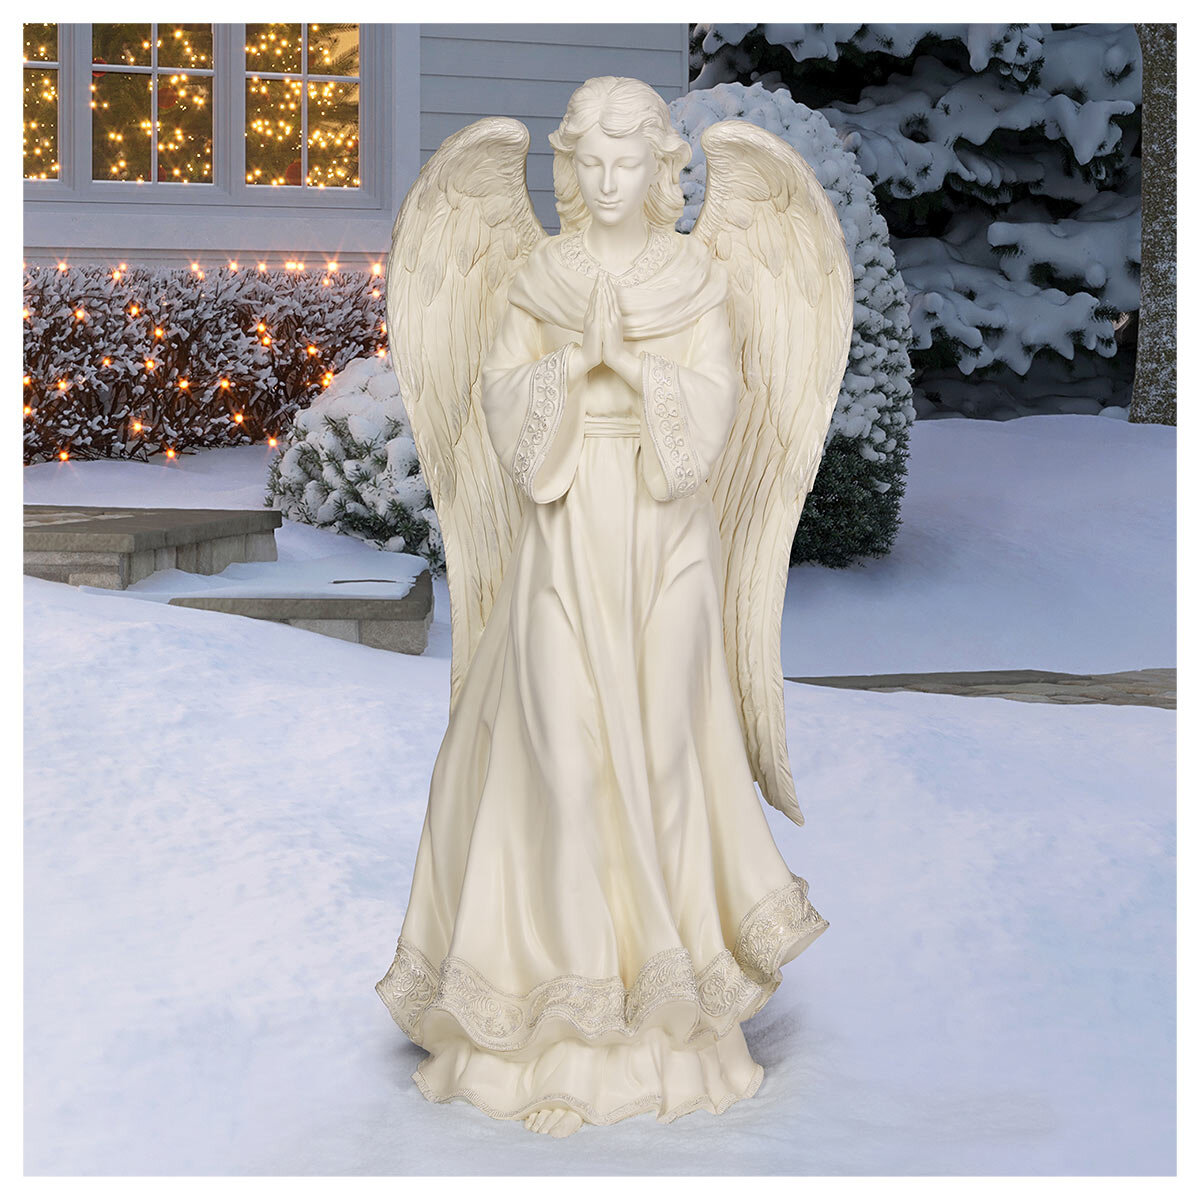 Buy 70" Angel with LED Lights Lifestyle Image at Costco.co.uk